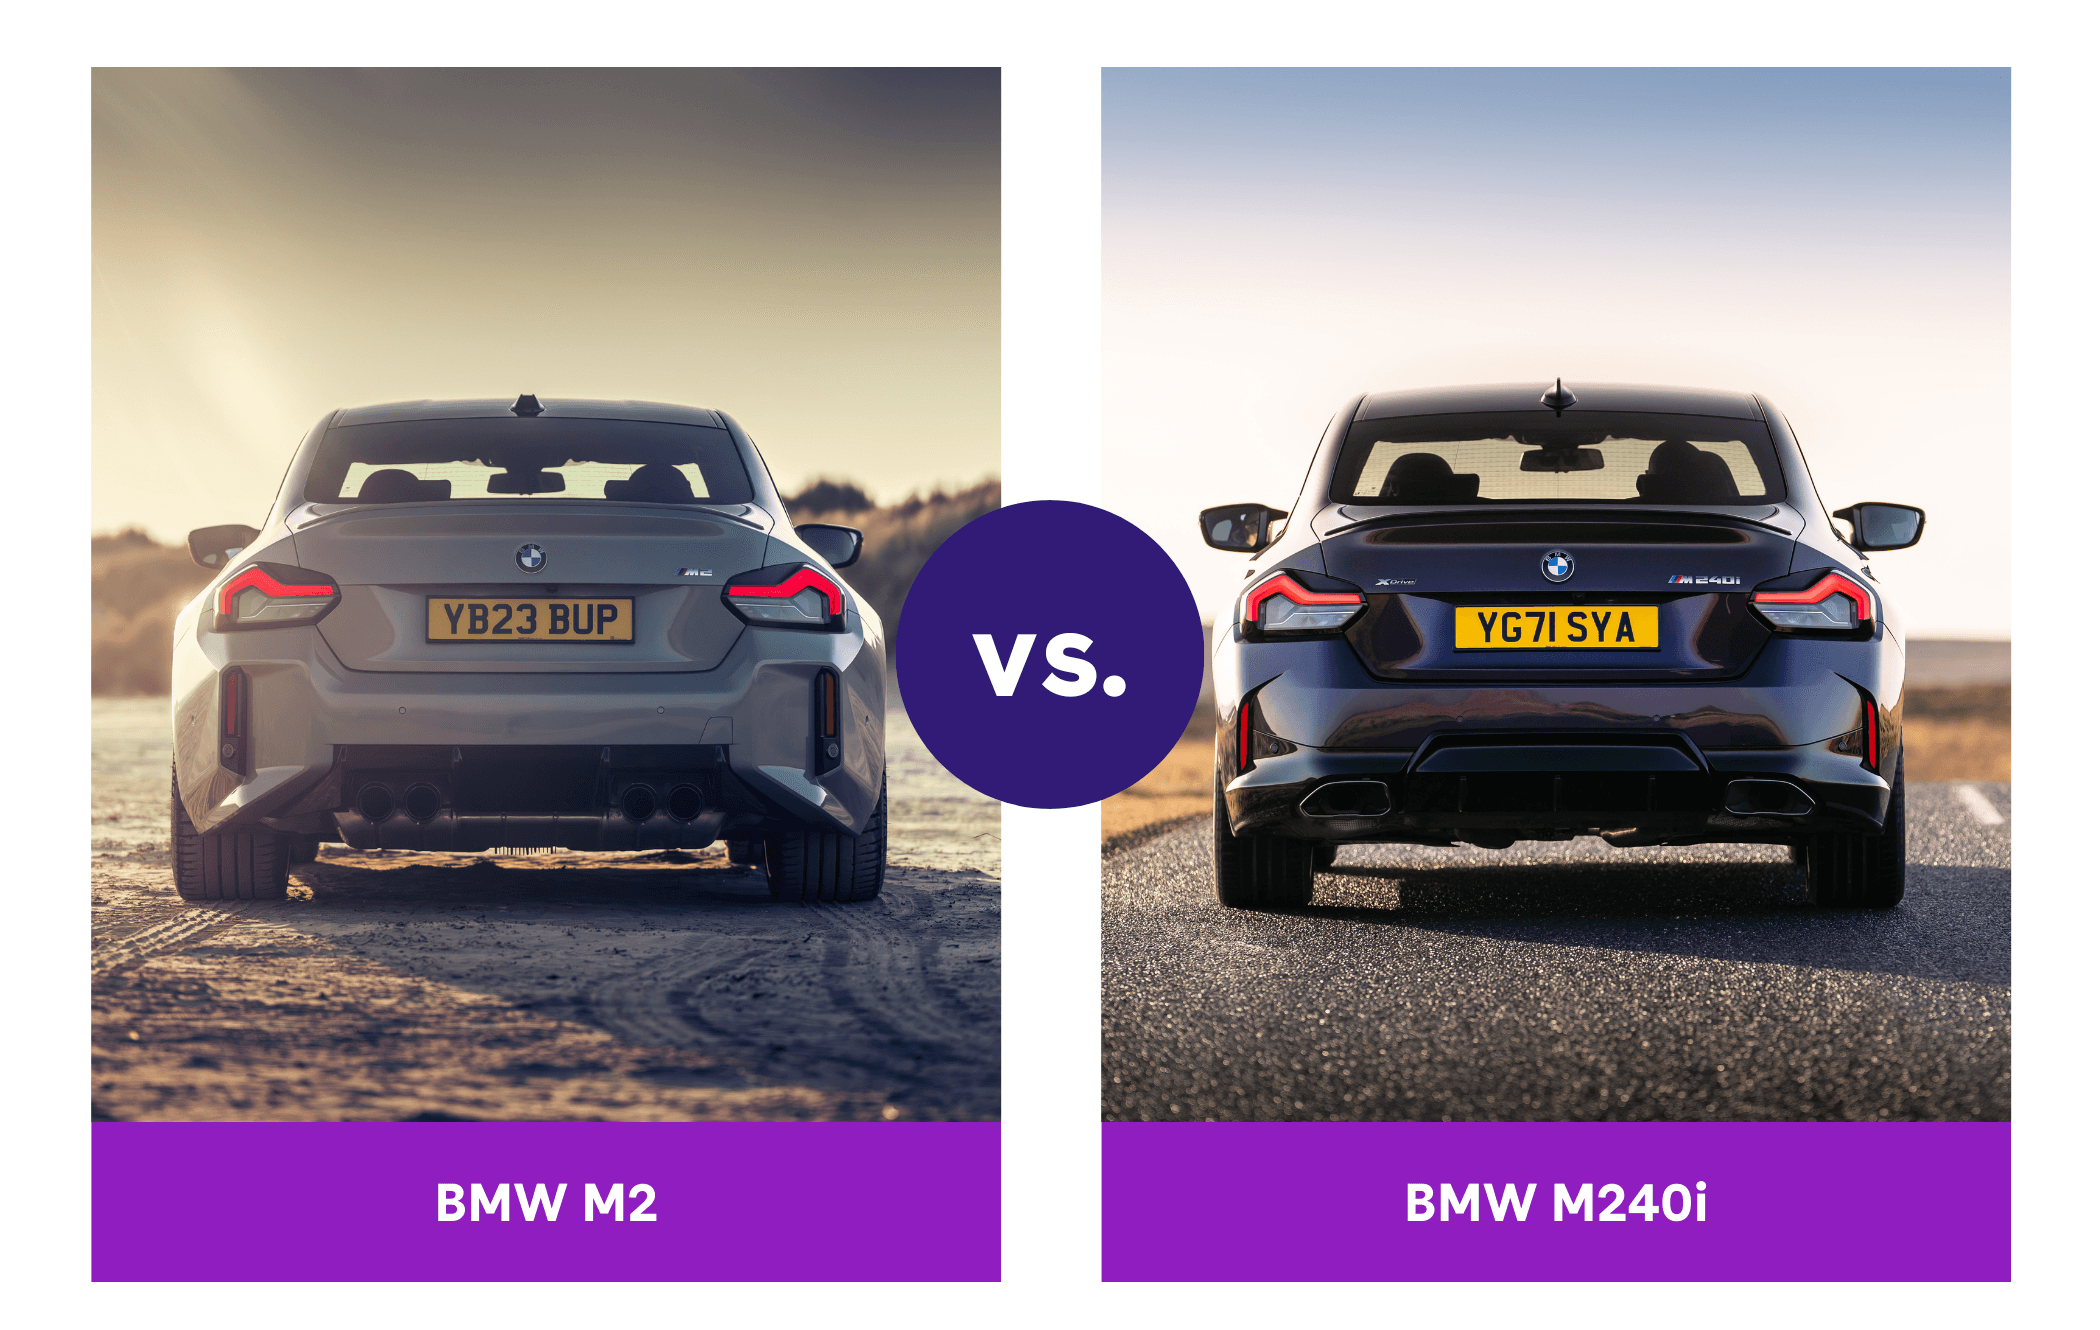 Side-by-side rear view of grey BMW M2 and purple BMW M240i